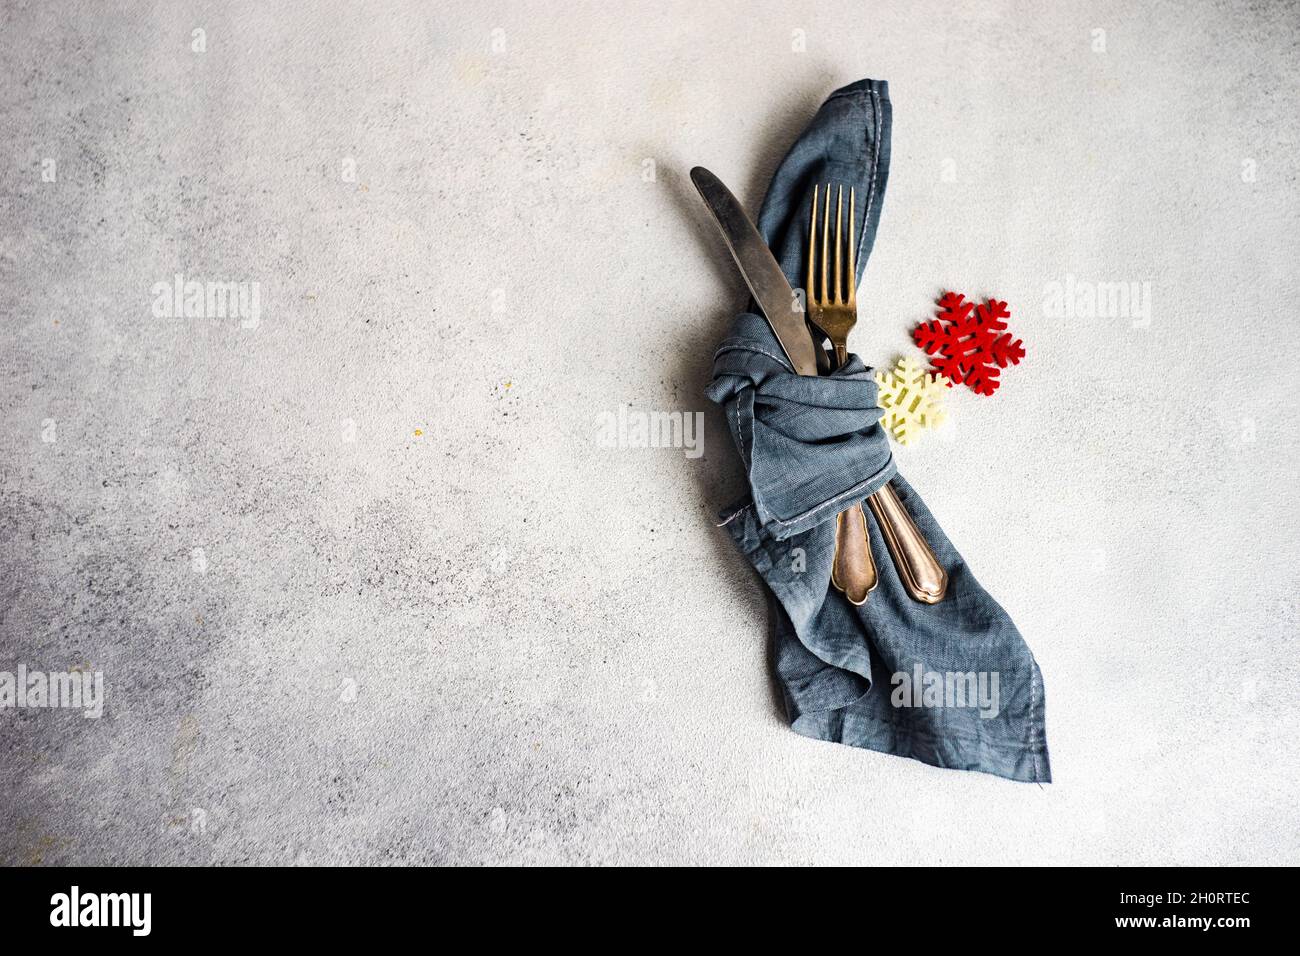 Cutlery wrapped in a napkin with snowflake decorations Stock Photo